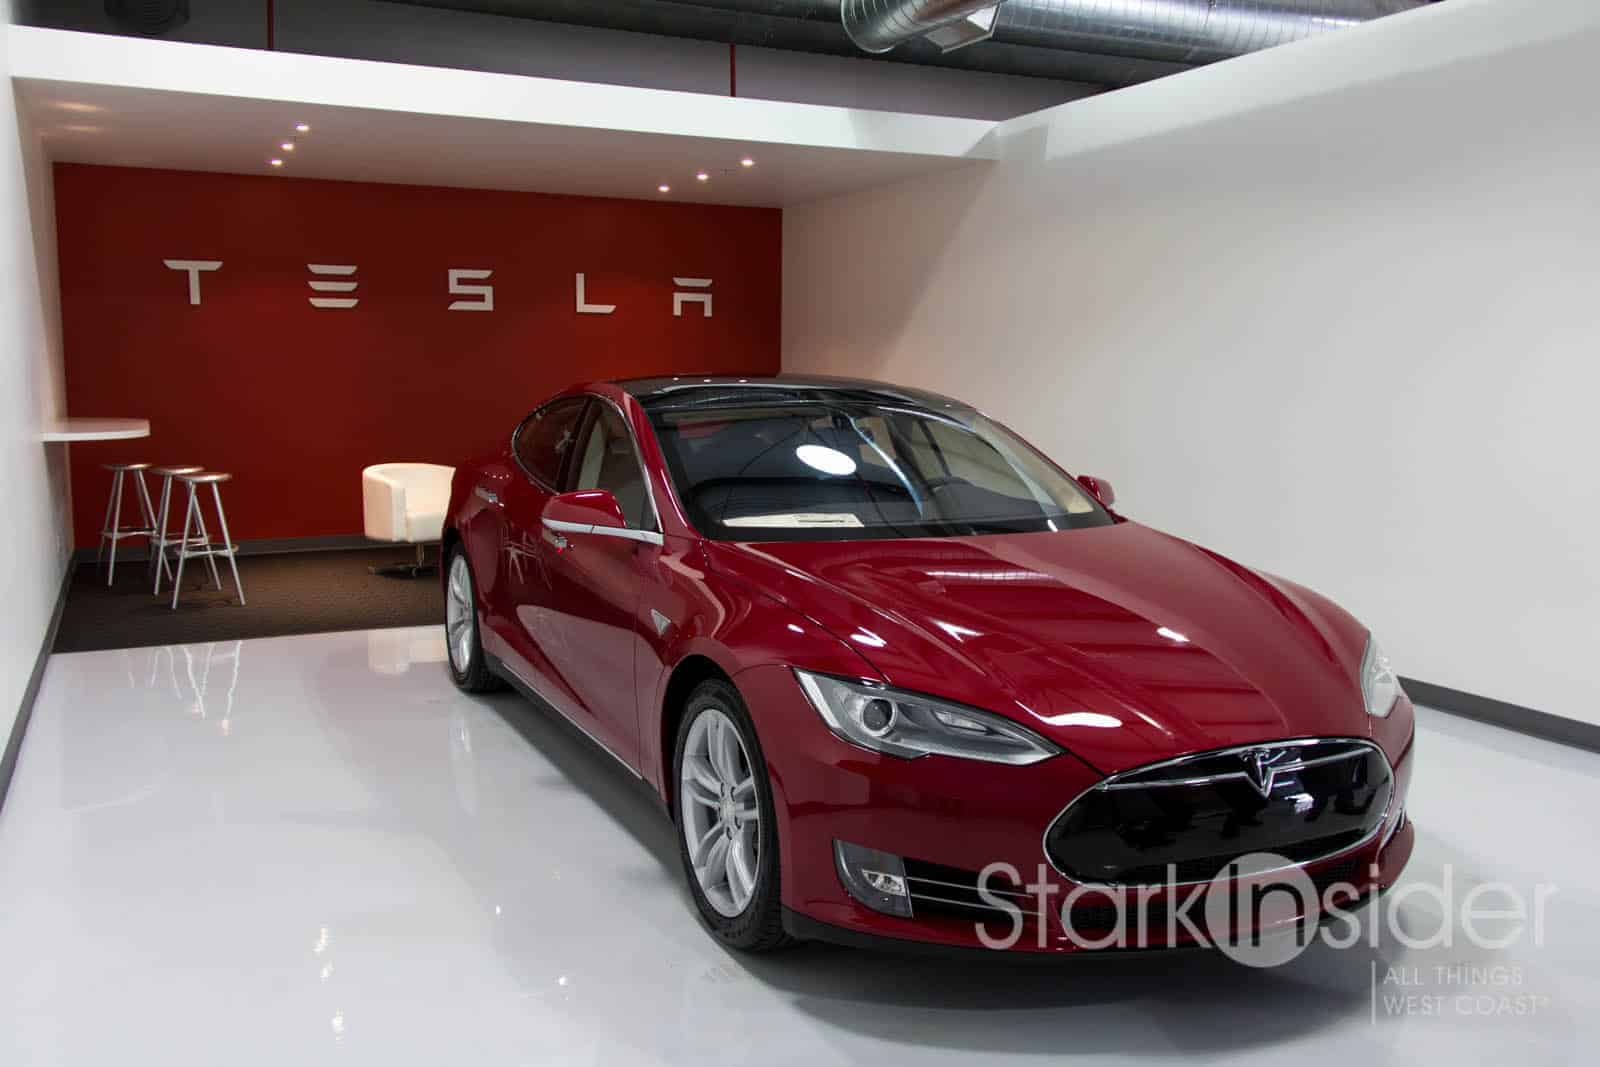 the good news tesla breaks record delivers cars the bad news everyone wants more more more